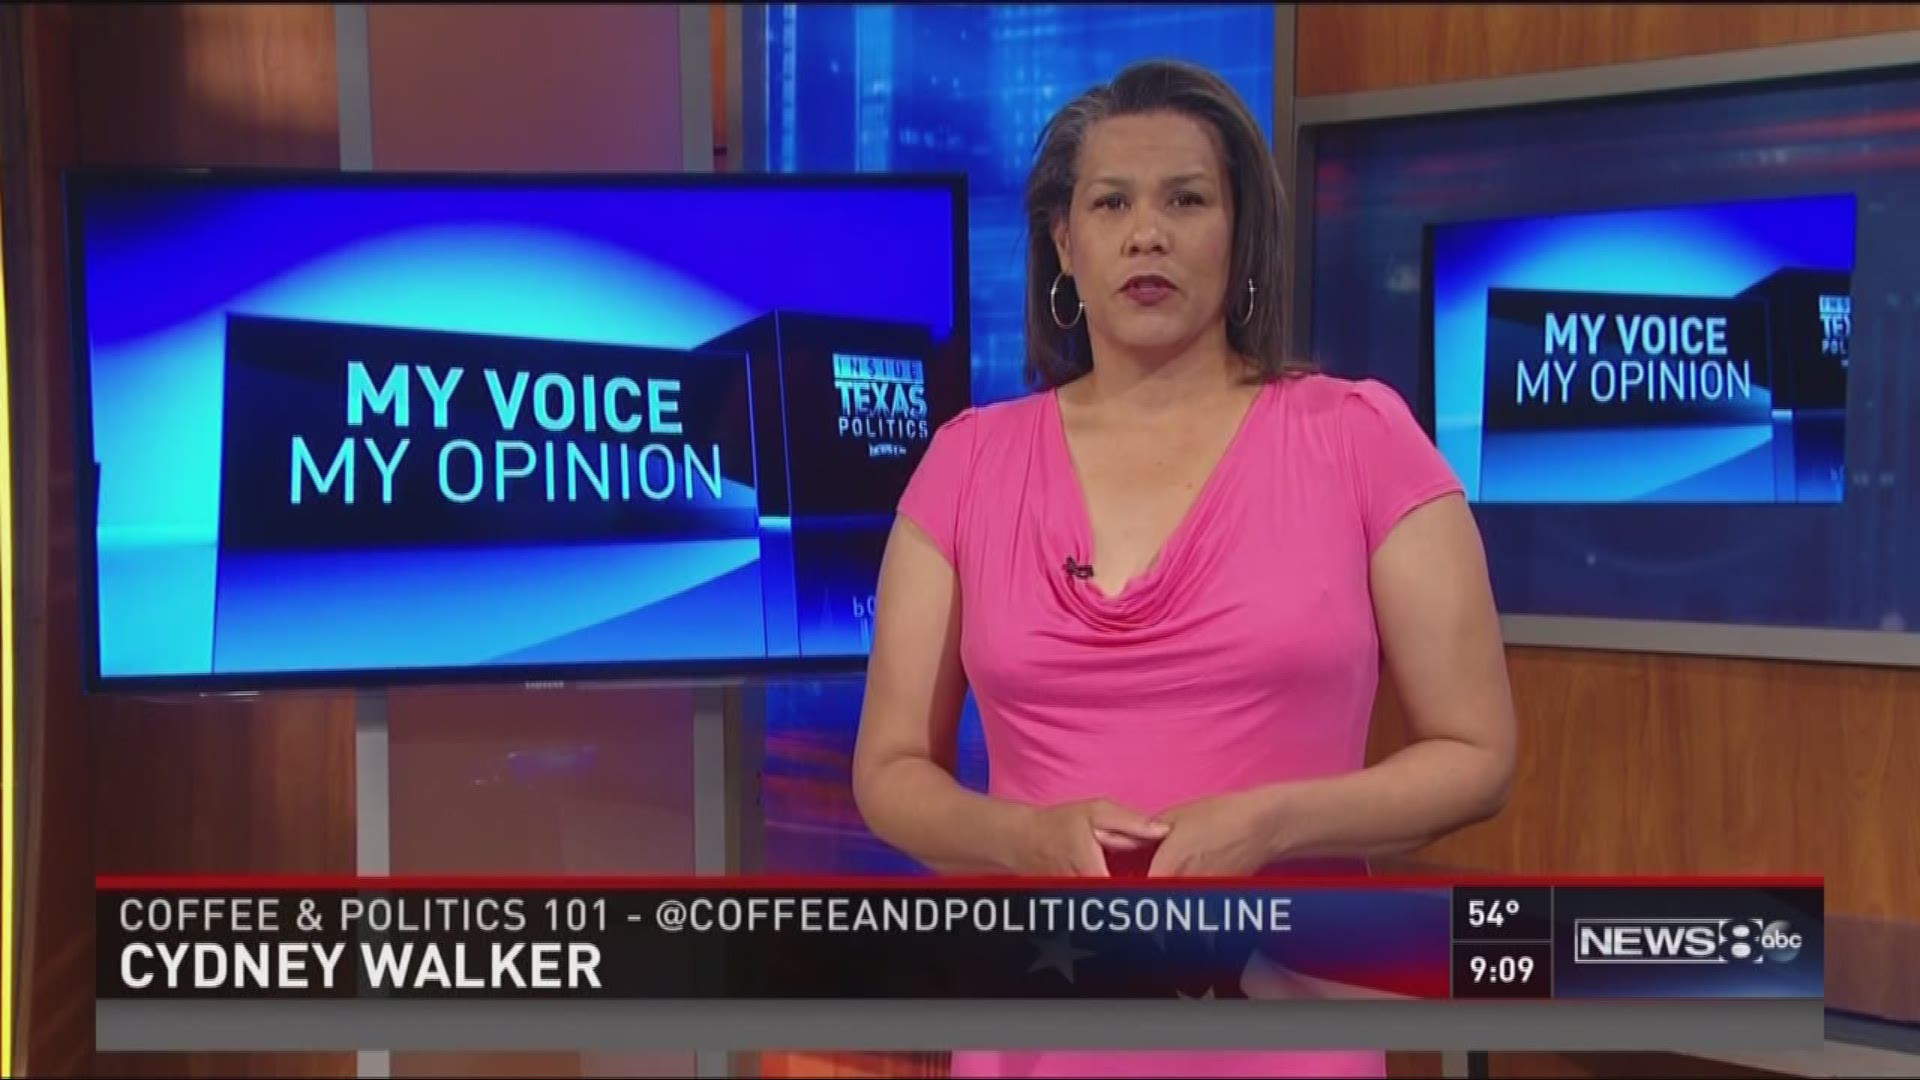 North Texas will have two elections next month. There will be a primary runoff on May 22 and an election on May 5 for cities and quite a few seats on school boards. On this week's My Voice, My opinion, Cydney Walker, from Coffee and Politics 101, said ca